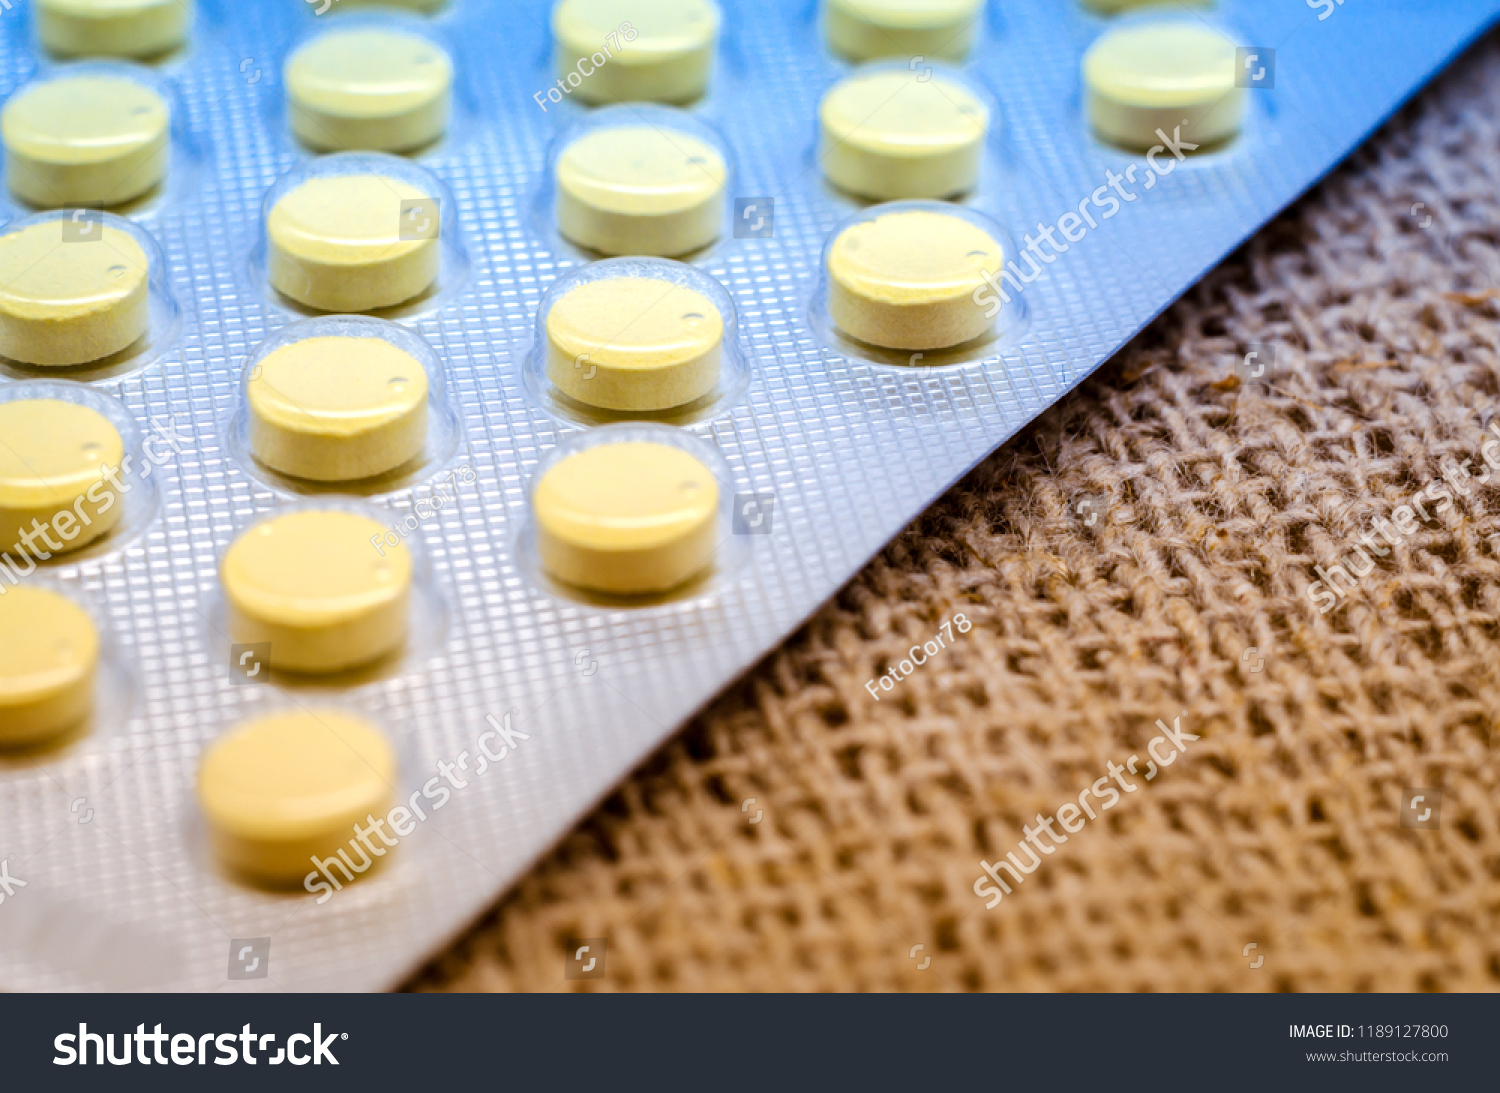 Download Small Yellow Pills Blister Package On Stock Photo Edit Now 1189127800 Yellowimages Mockups